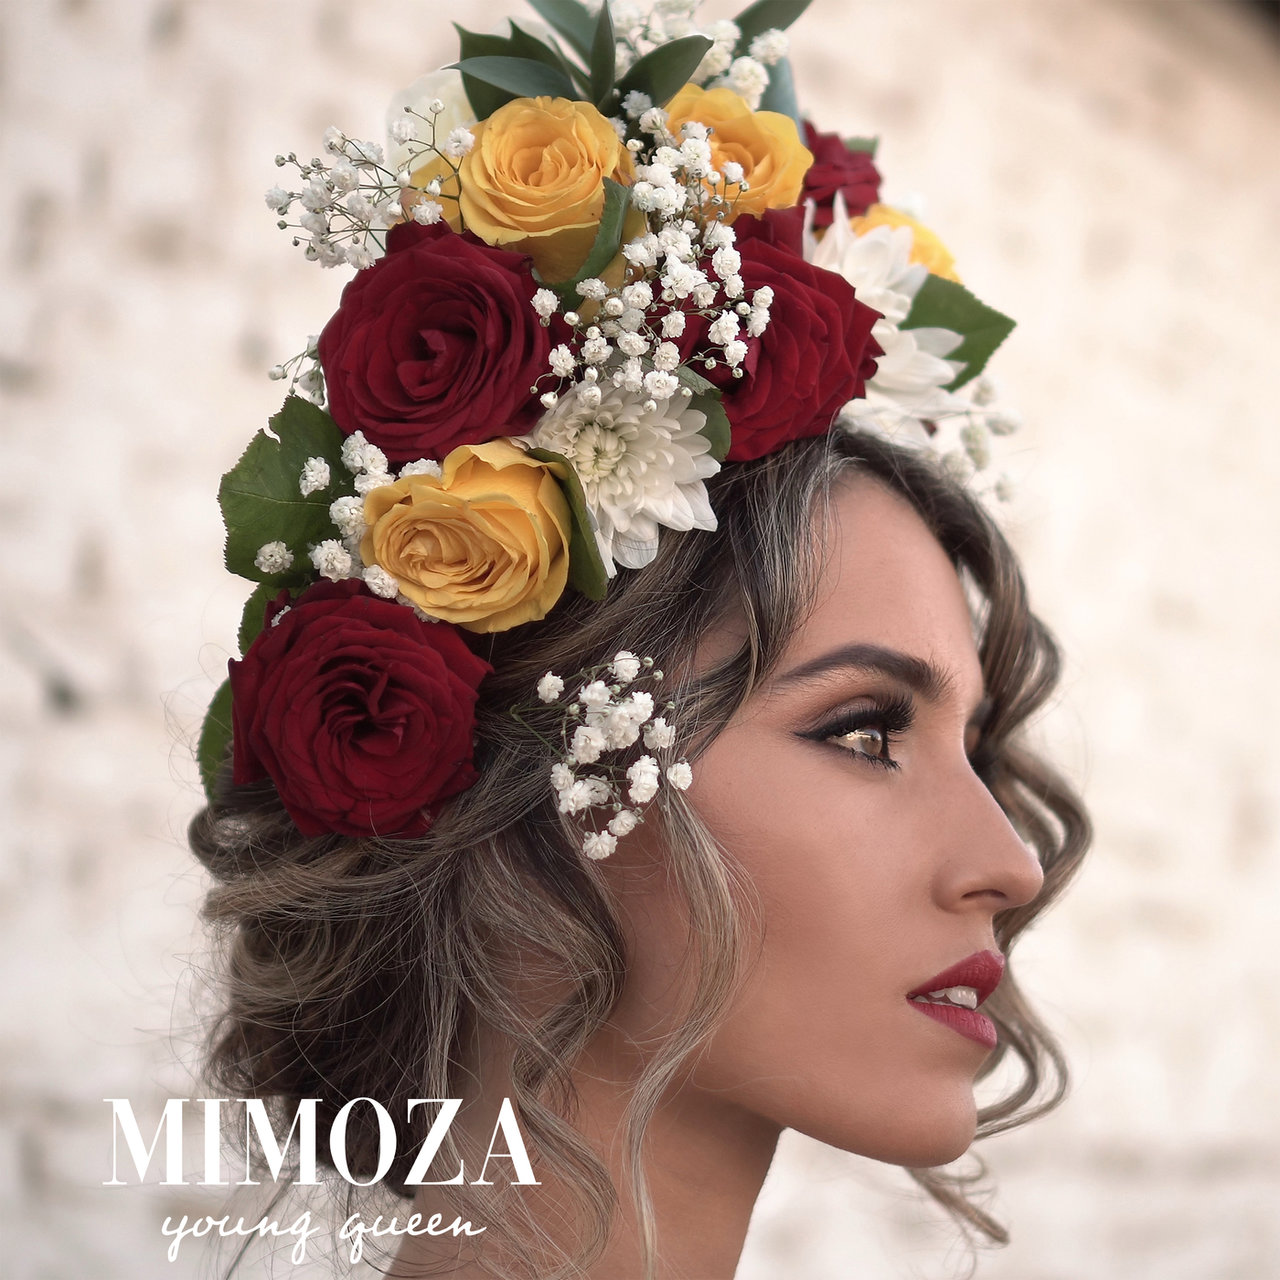 Mimoza — Young Queen cover artwork